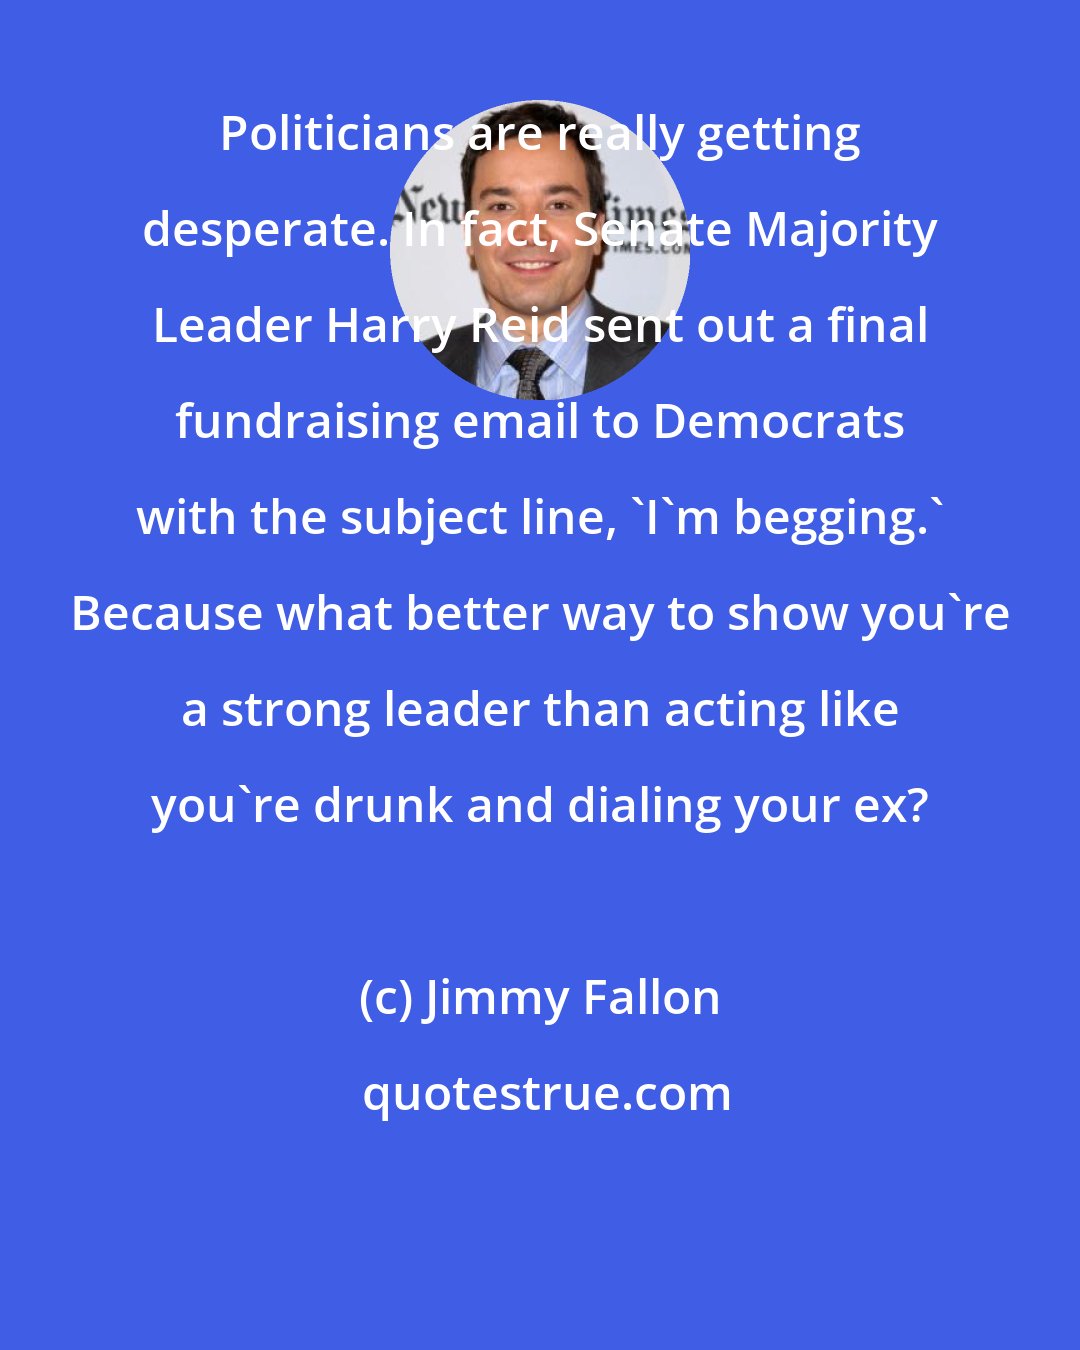 Jimmy Fallon: Politicians are really getting desperate. In fact, Senate Majority Leader Harry Reid sent out a final fundraising email to Democrats with the subject line, 'I'm begging.' Because what better way to show you're a strong leader than acting like you're drunk and dialing your ex?